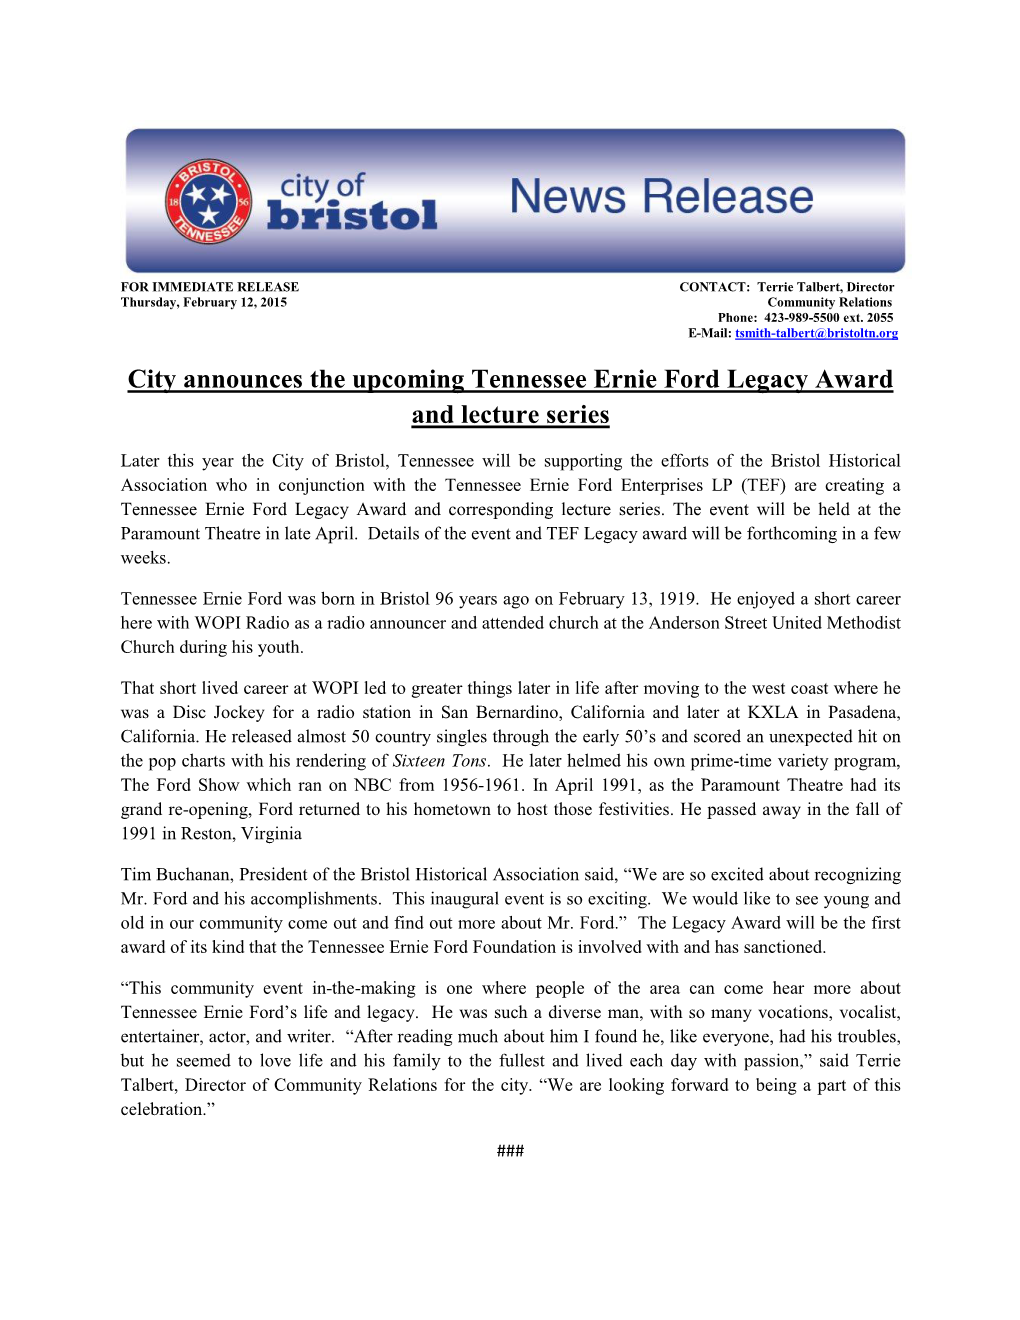 City Announces the Upcoming Tennessee Ernie Ford Legacy Award and Lecture Series